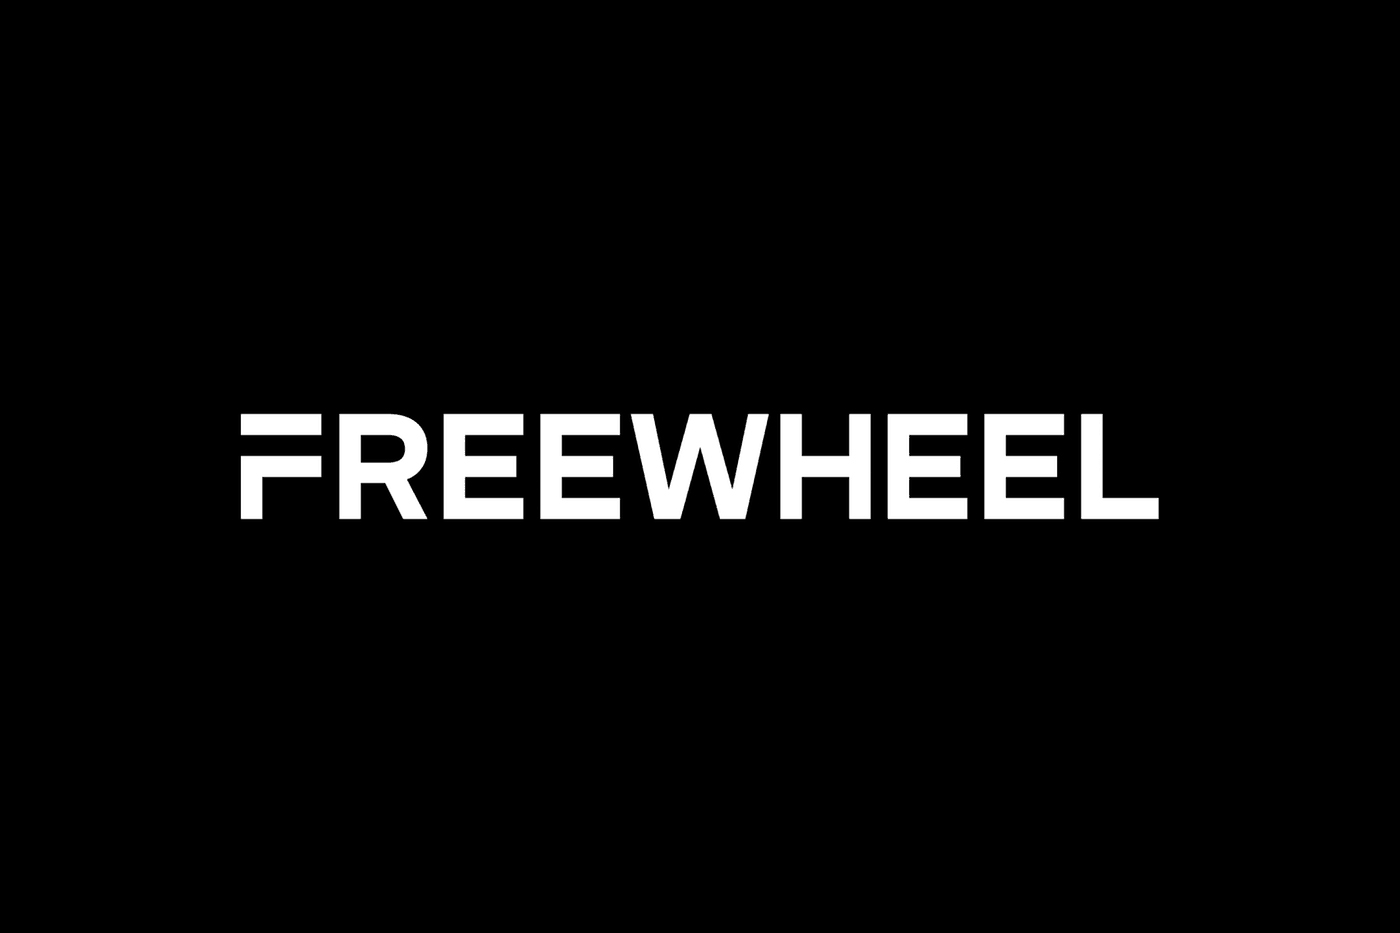 Logotype by New York based graphic design studio Collins for Freewheel, a wi-fi only mobile phone service